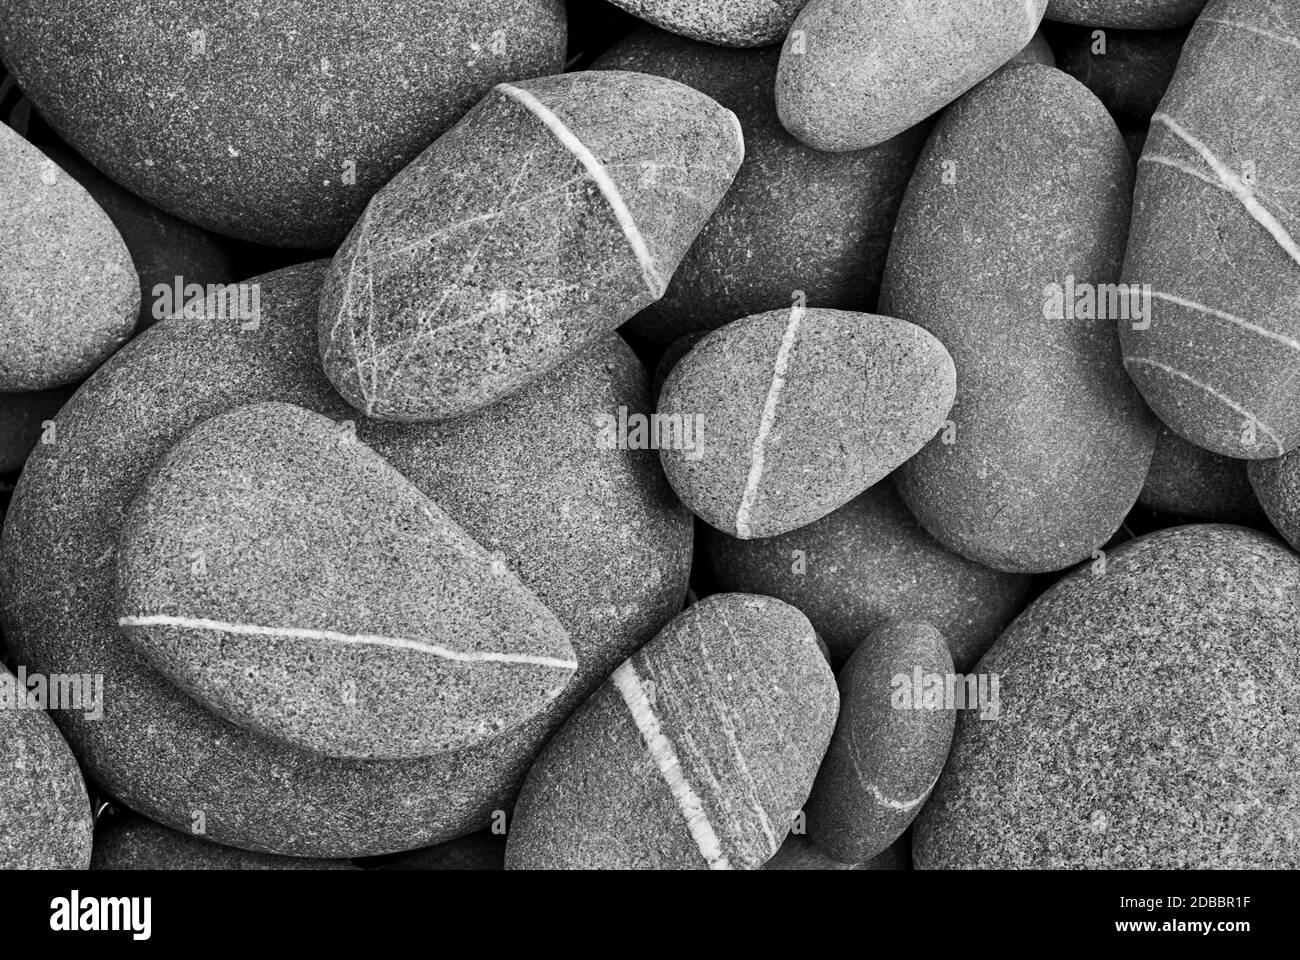 black and white image, selection of grey pebble with a whit line Stock Photo